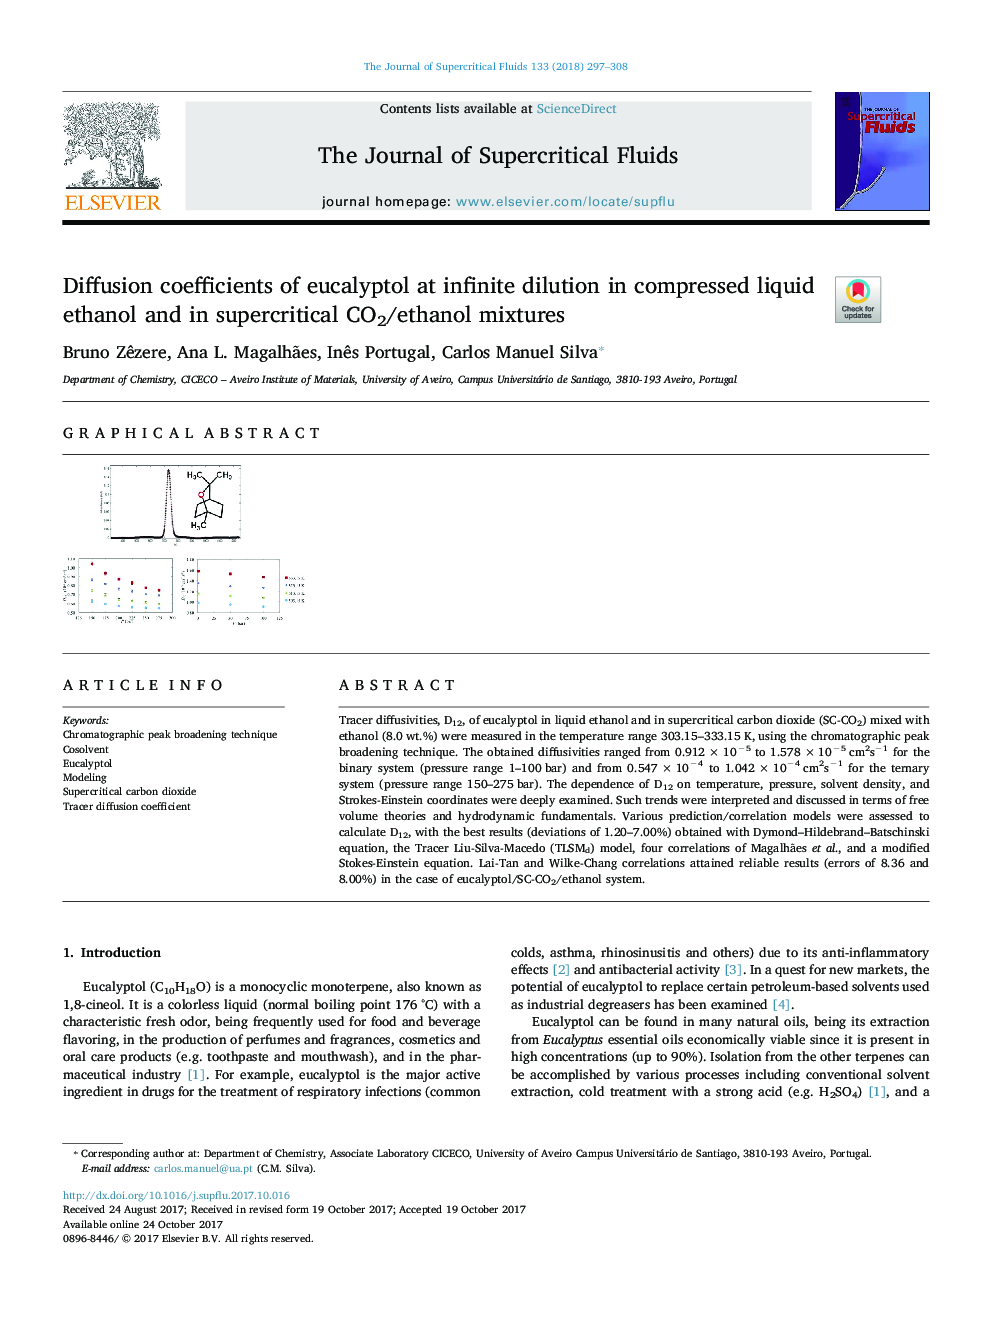 Diffusion coefficients of eucalyptol at infinite dilution in compressed liquid ethanol and in supercritical CO2/ethanol mixtures